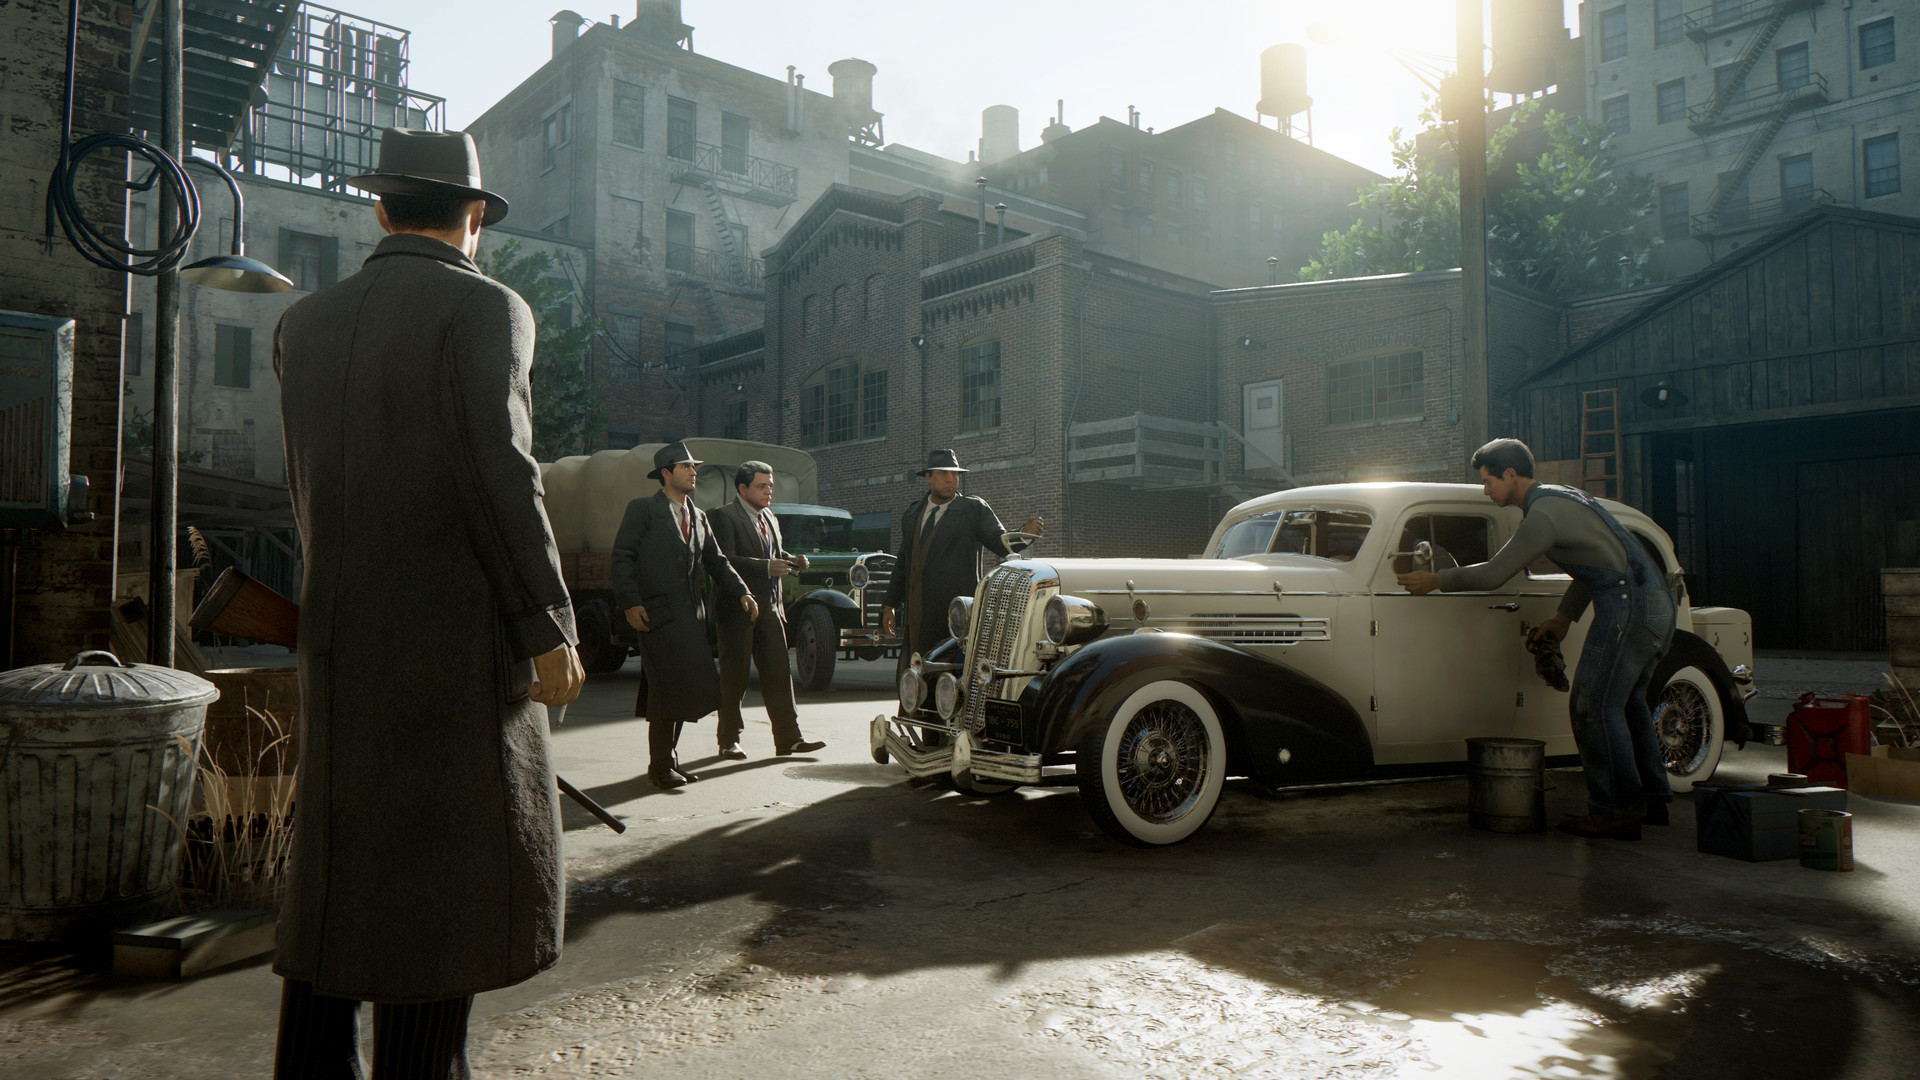 Mafia: Definitive Edition will include new experiences and an enhanced story